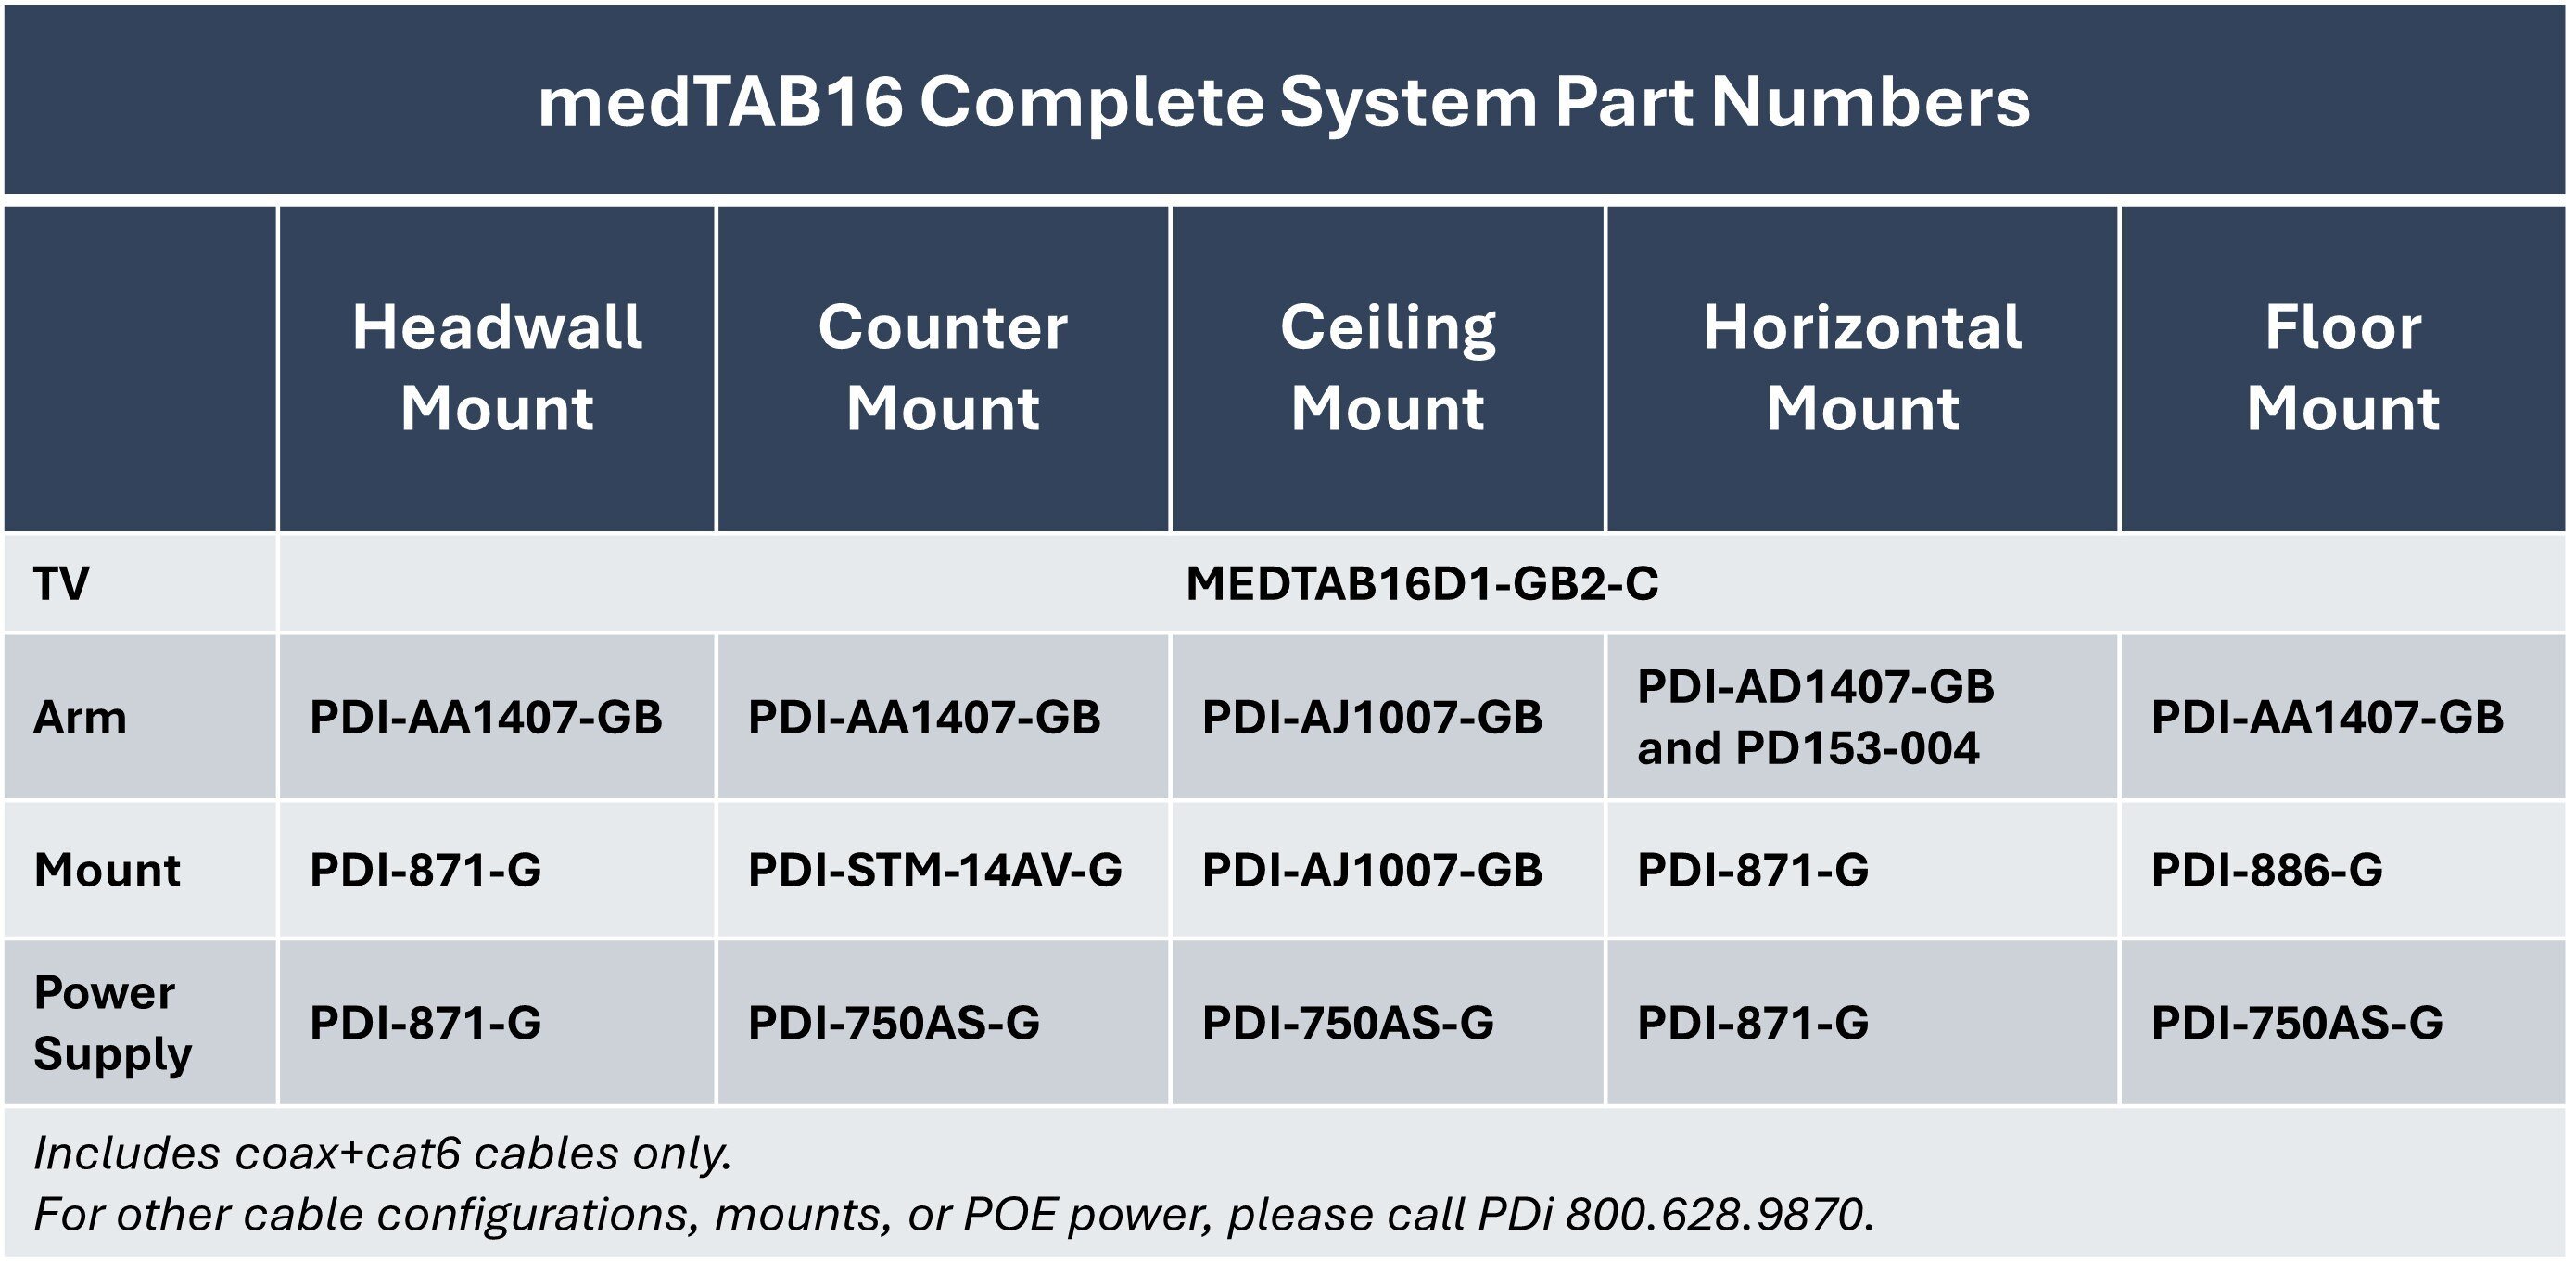 PDi Part Numbers for Complete medTAB16 Personal Patient TV